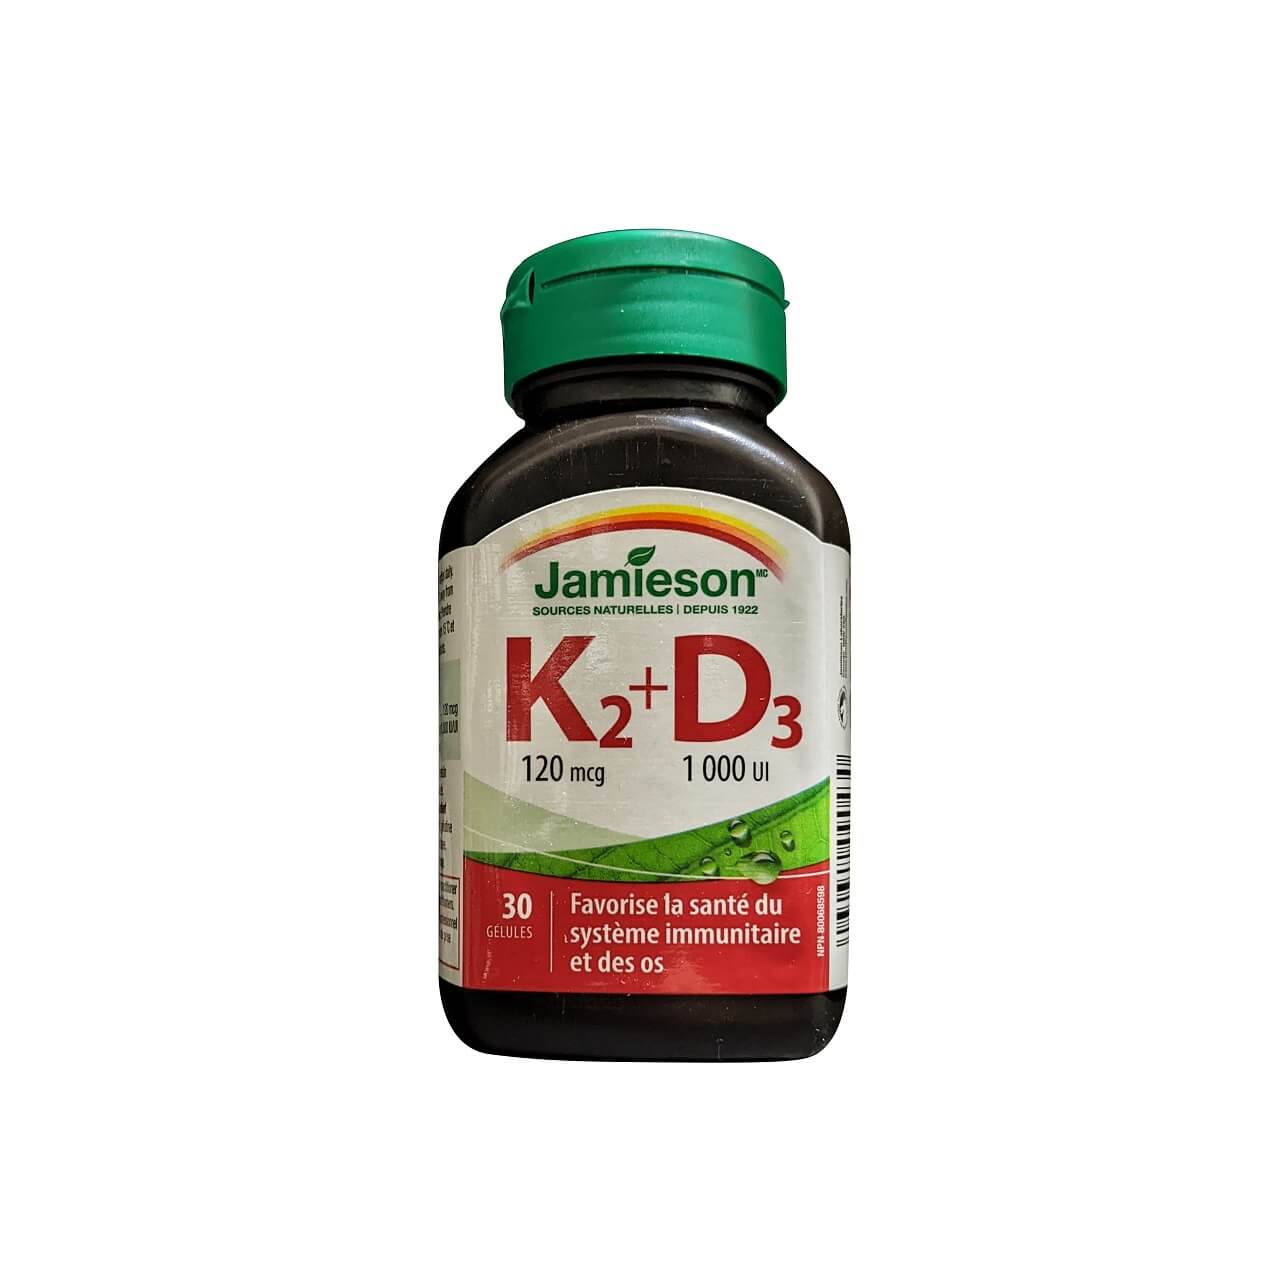 Product label for Jamieson Vitamin K2 (120 mcg) and D3 (1000 IU) (30 softgels) in French